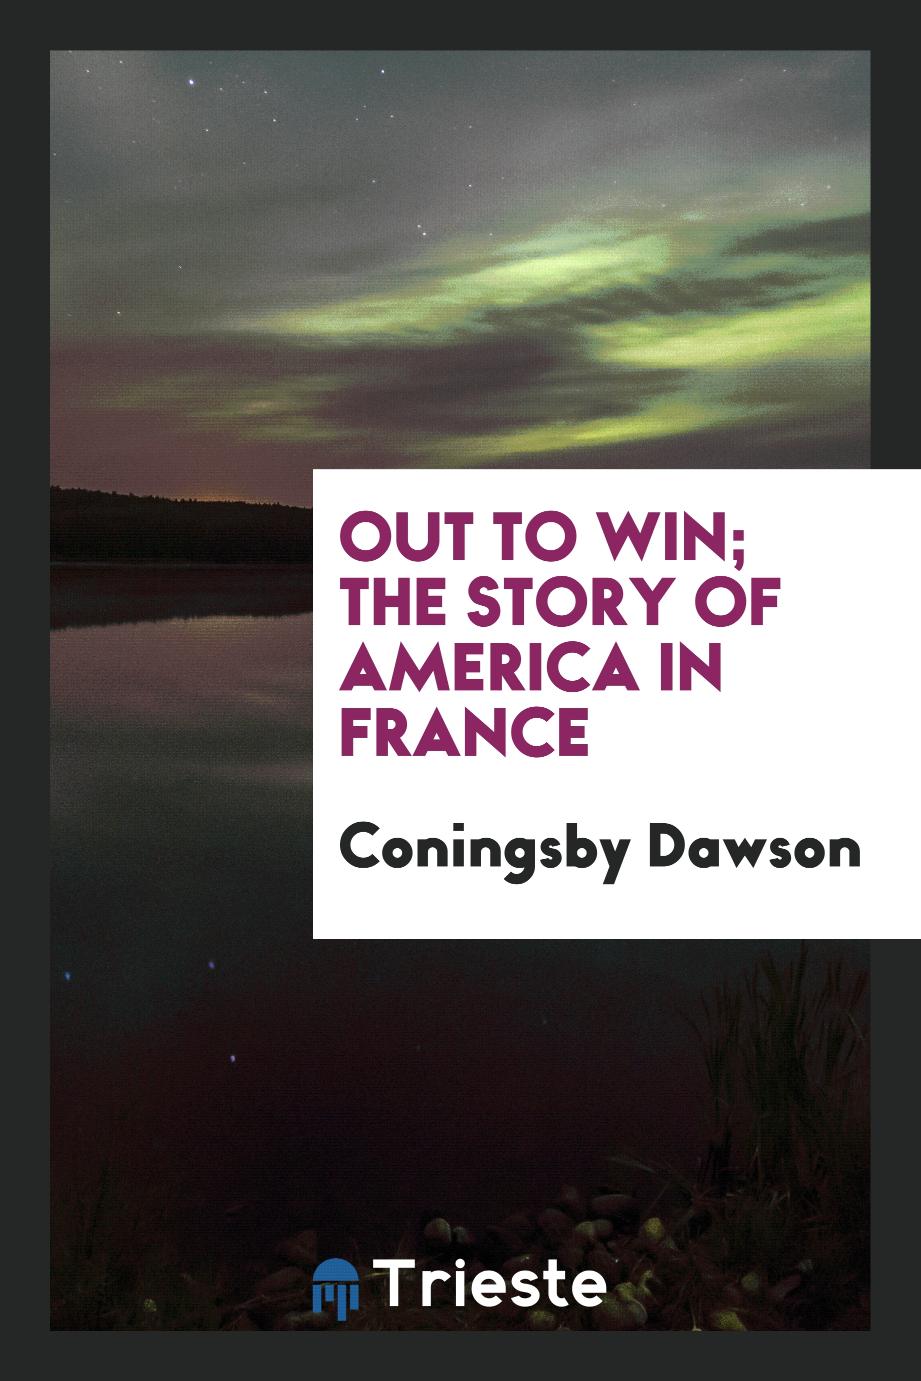 Out to win; the story of America in France